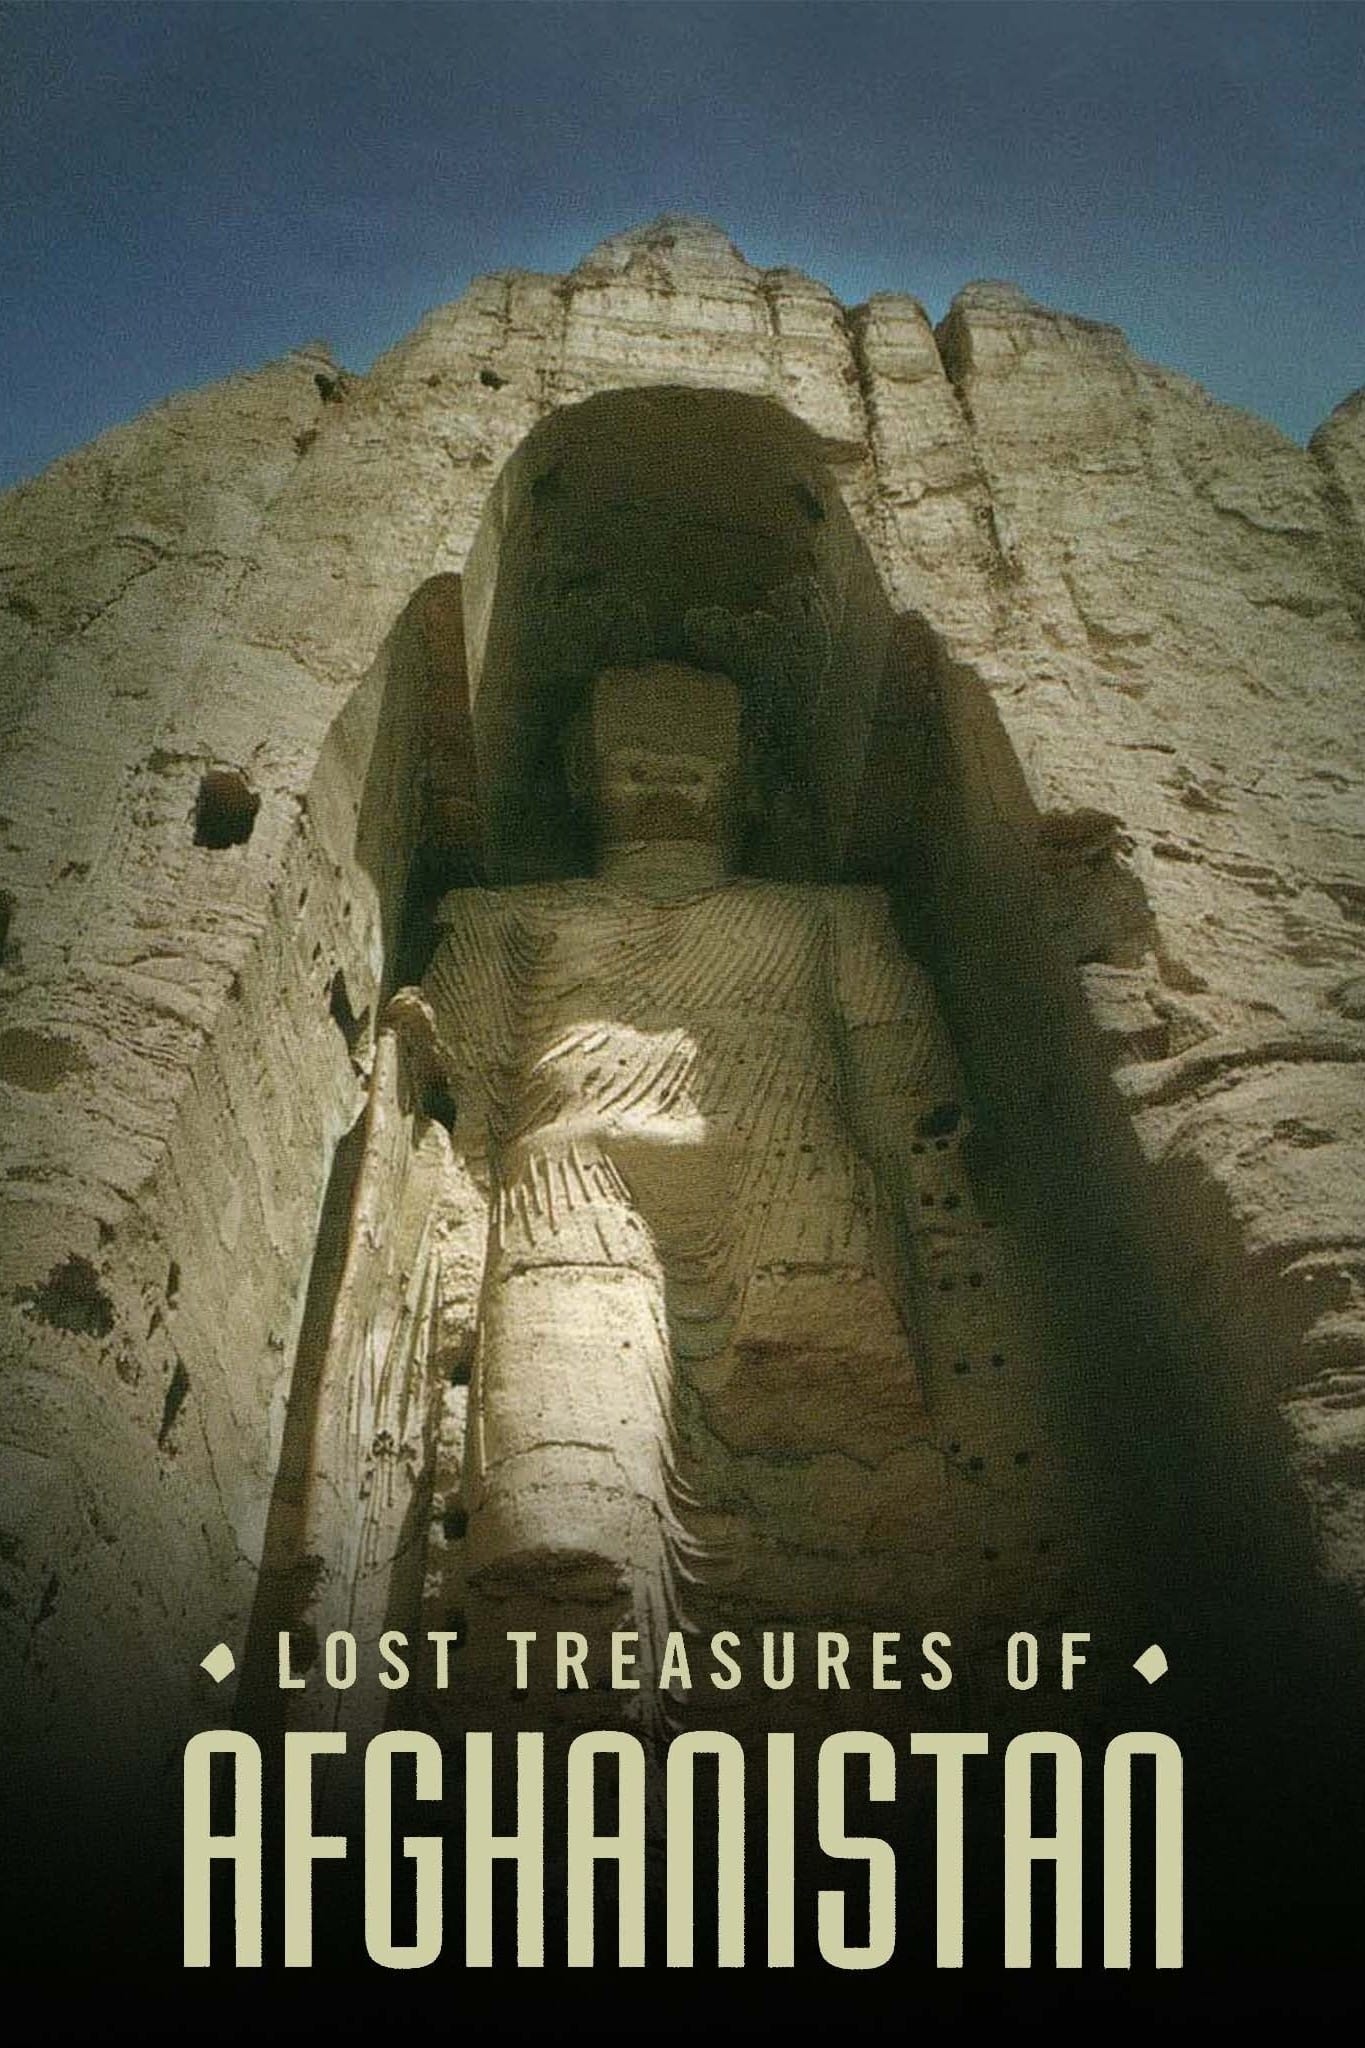 National Geographic: Lost Treasures of Afghanistan